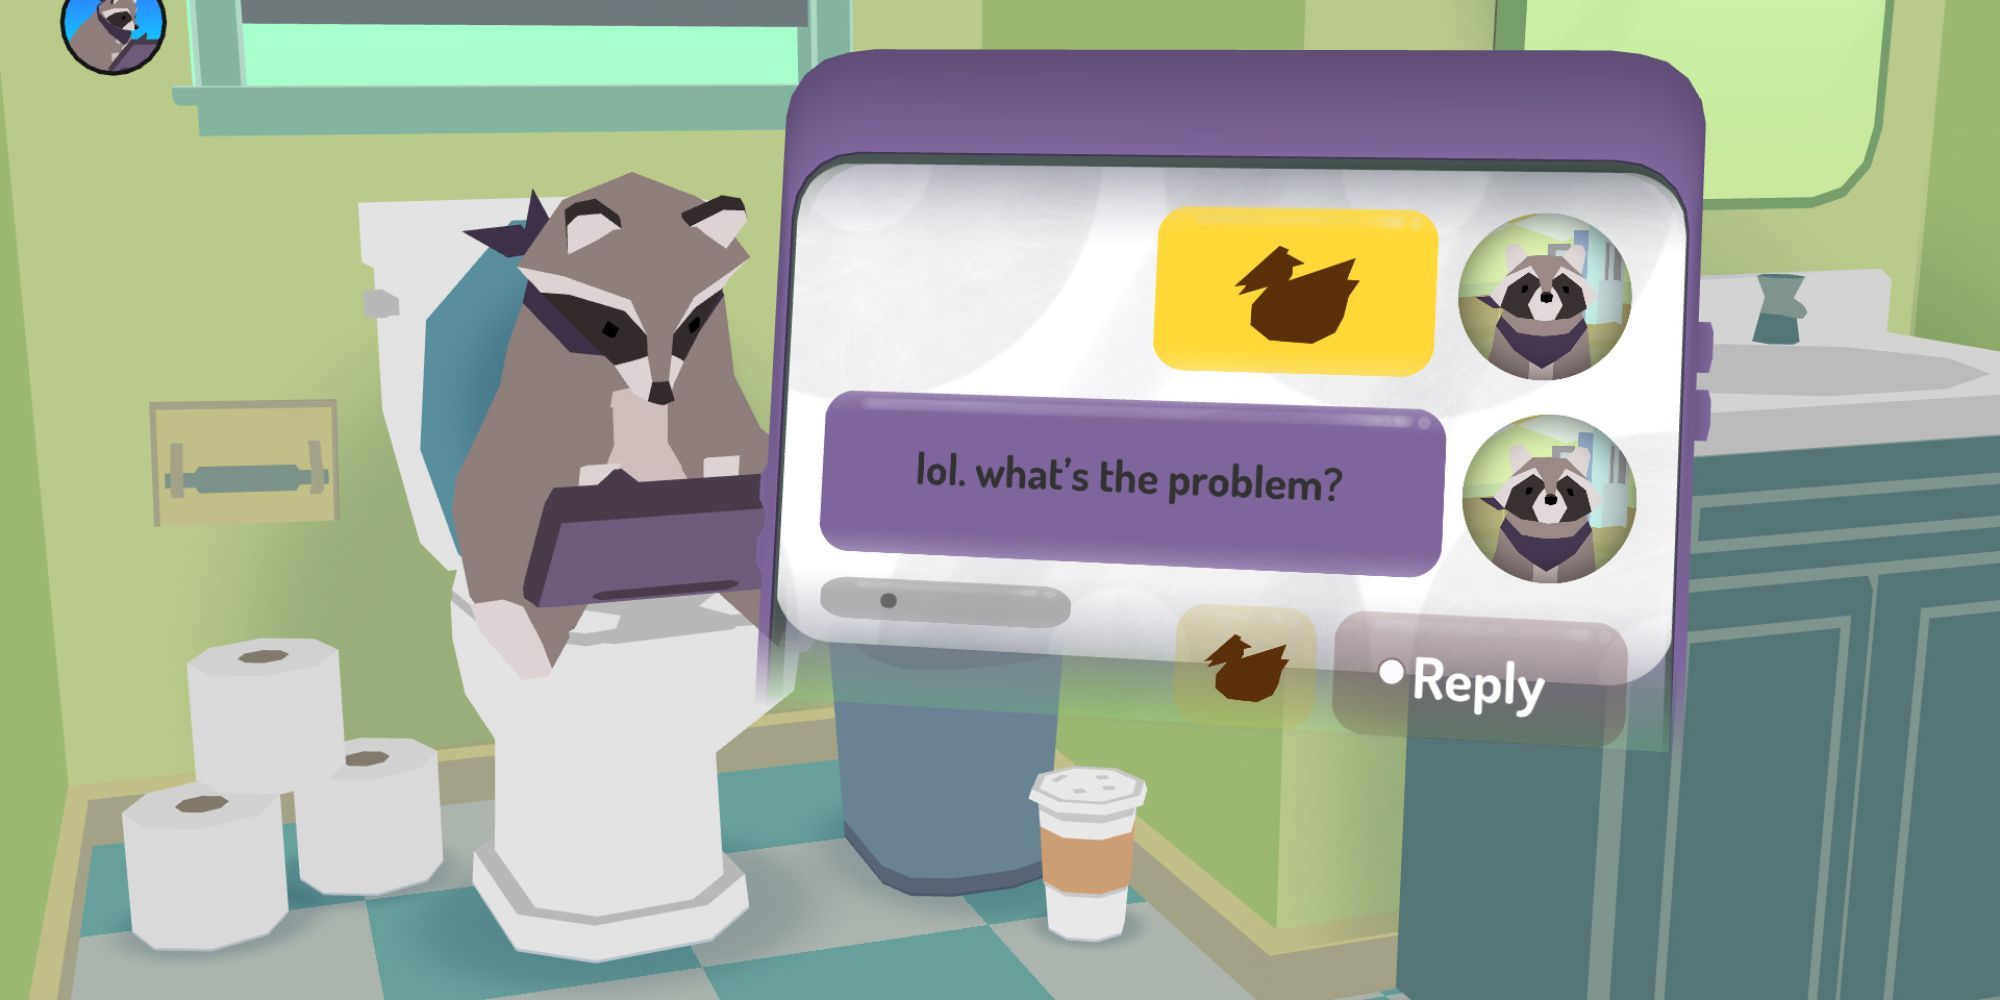 BK in Donut County sat on a toilet holding an iPad texting Mira